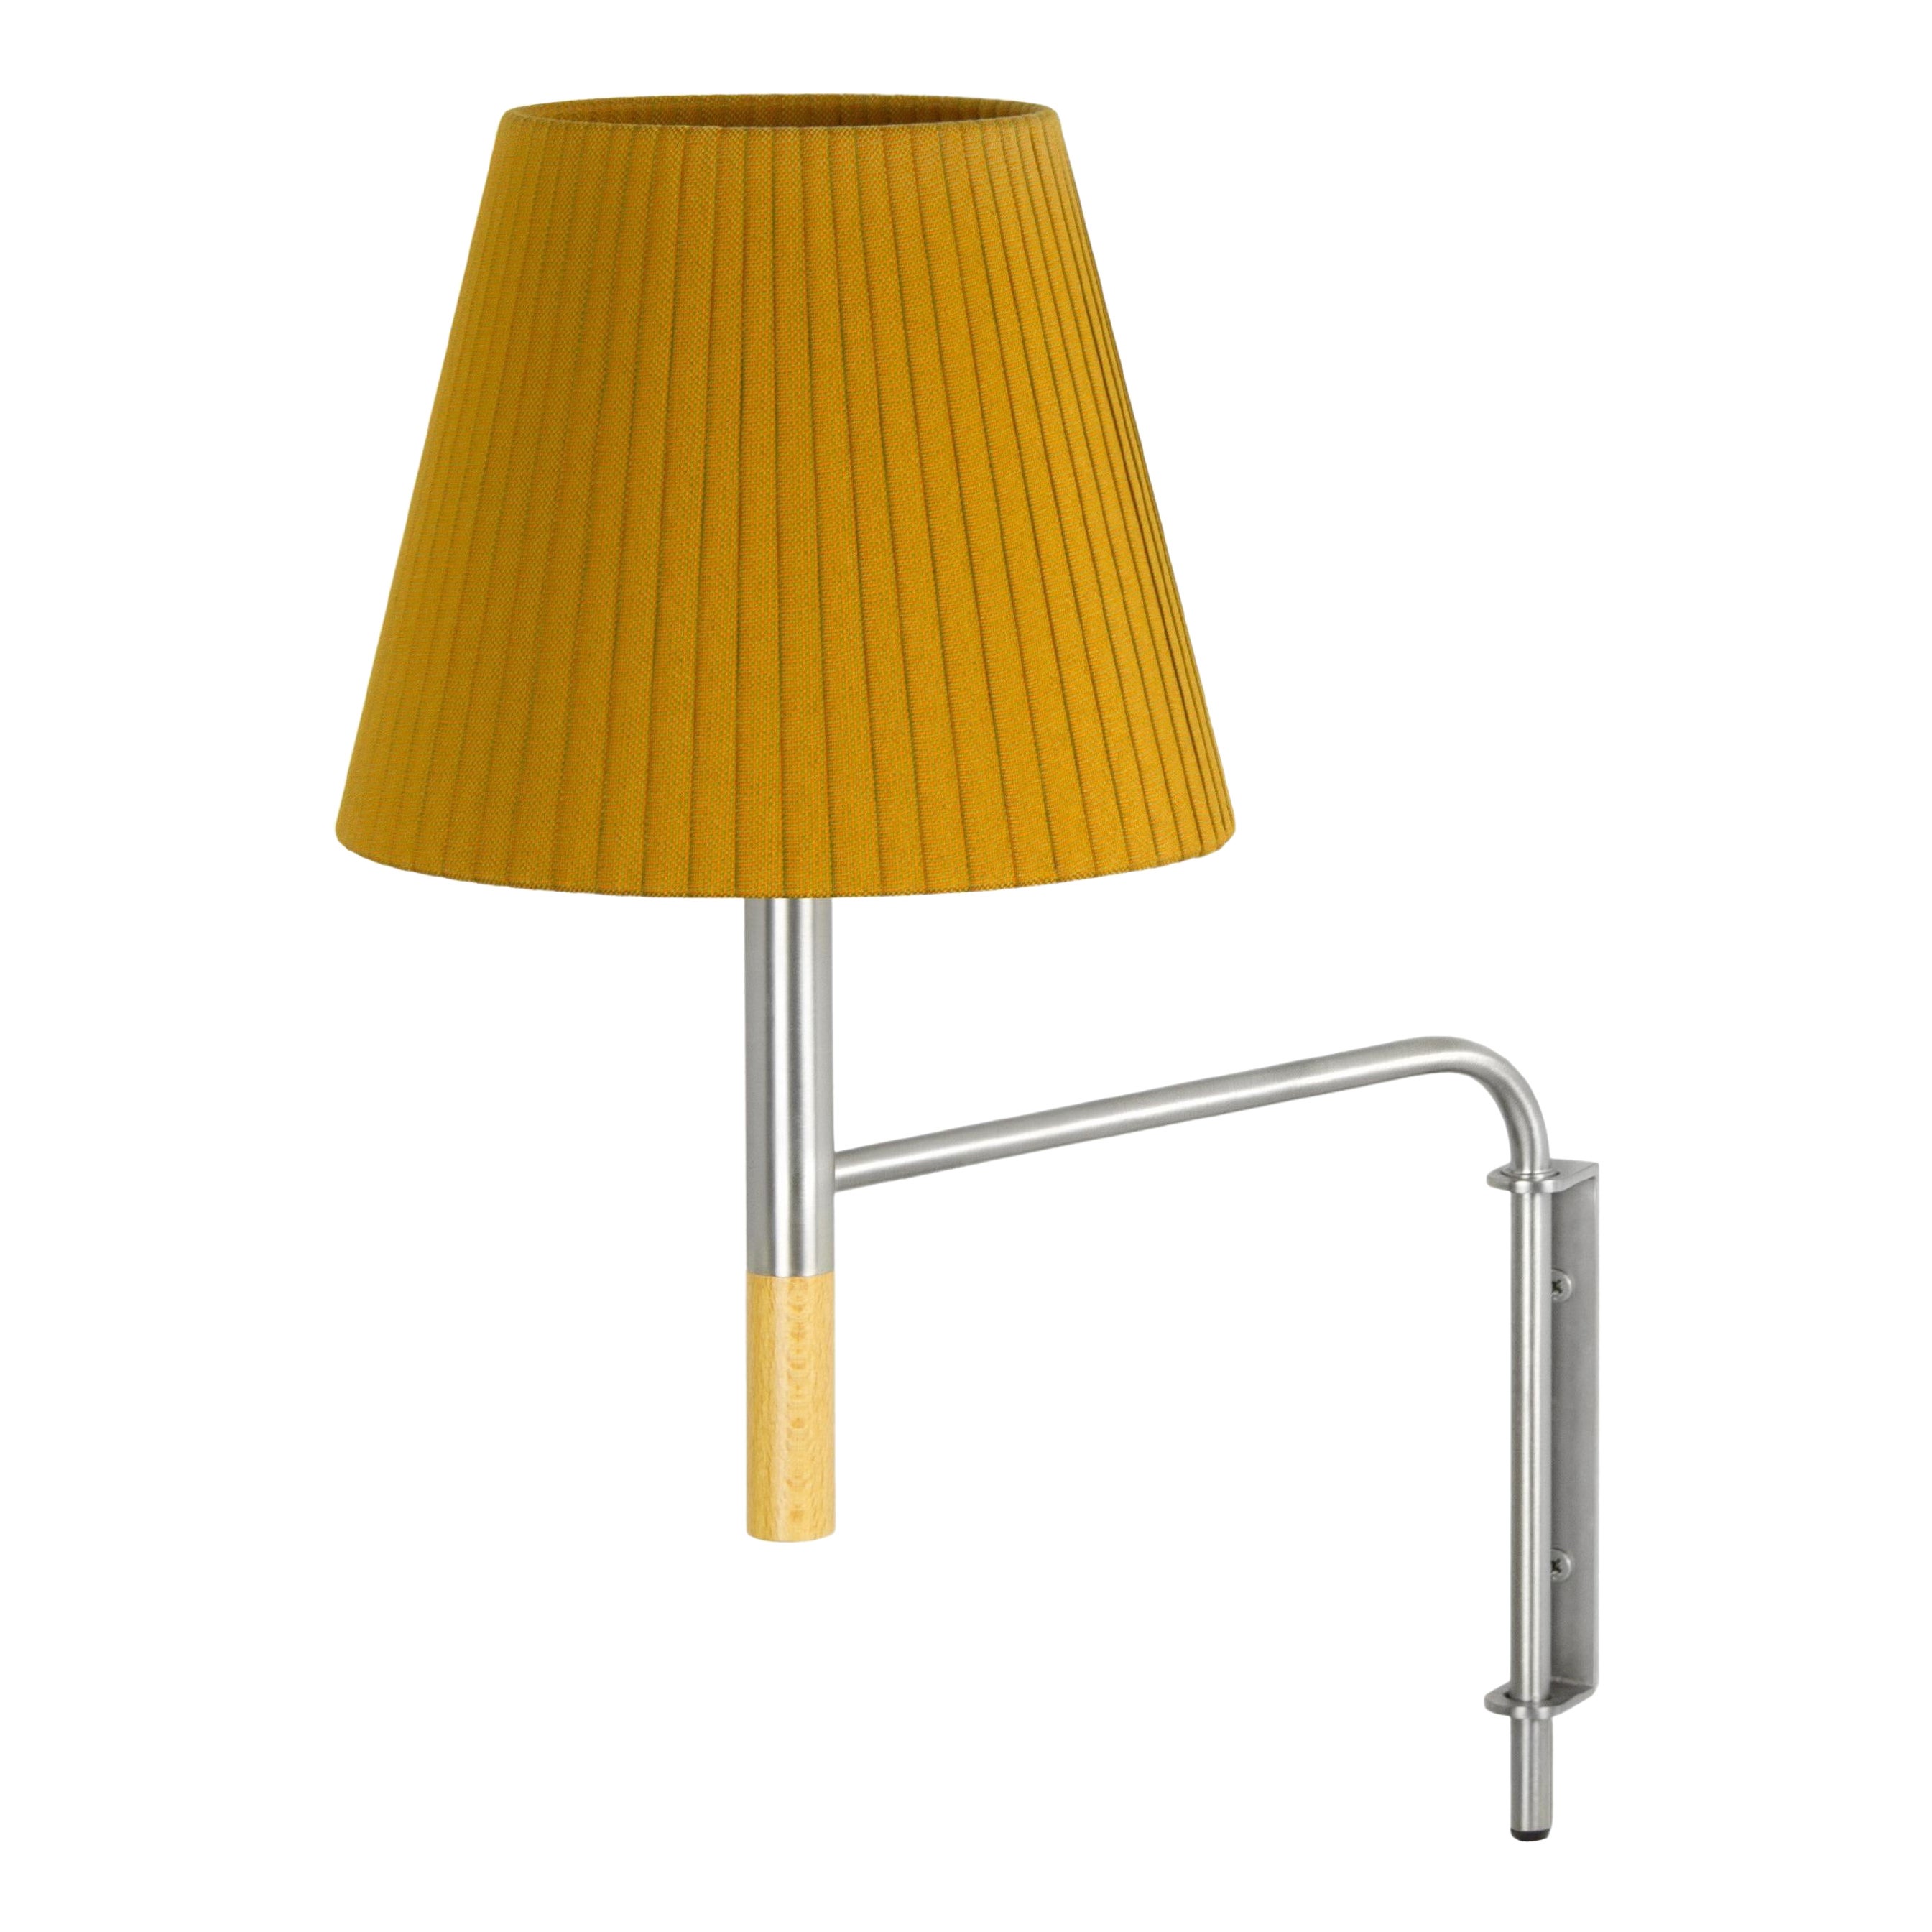 Mustard BC1 Wall Lamp by Santa & Cole For Sale